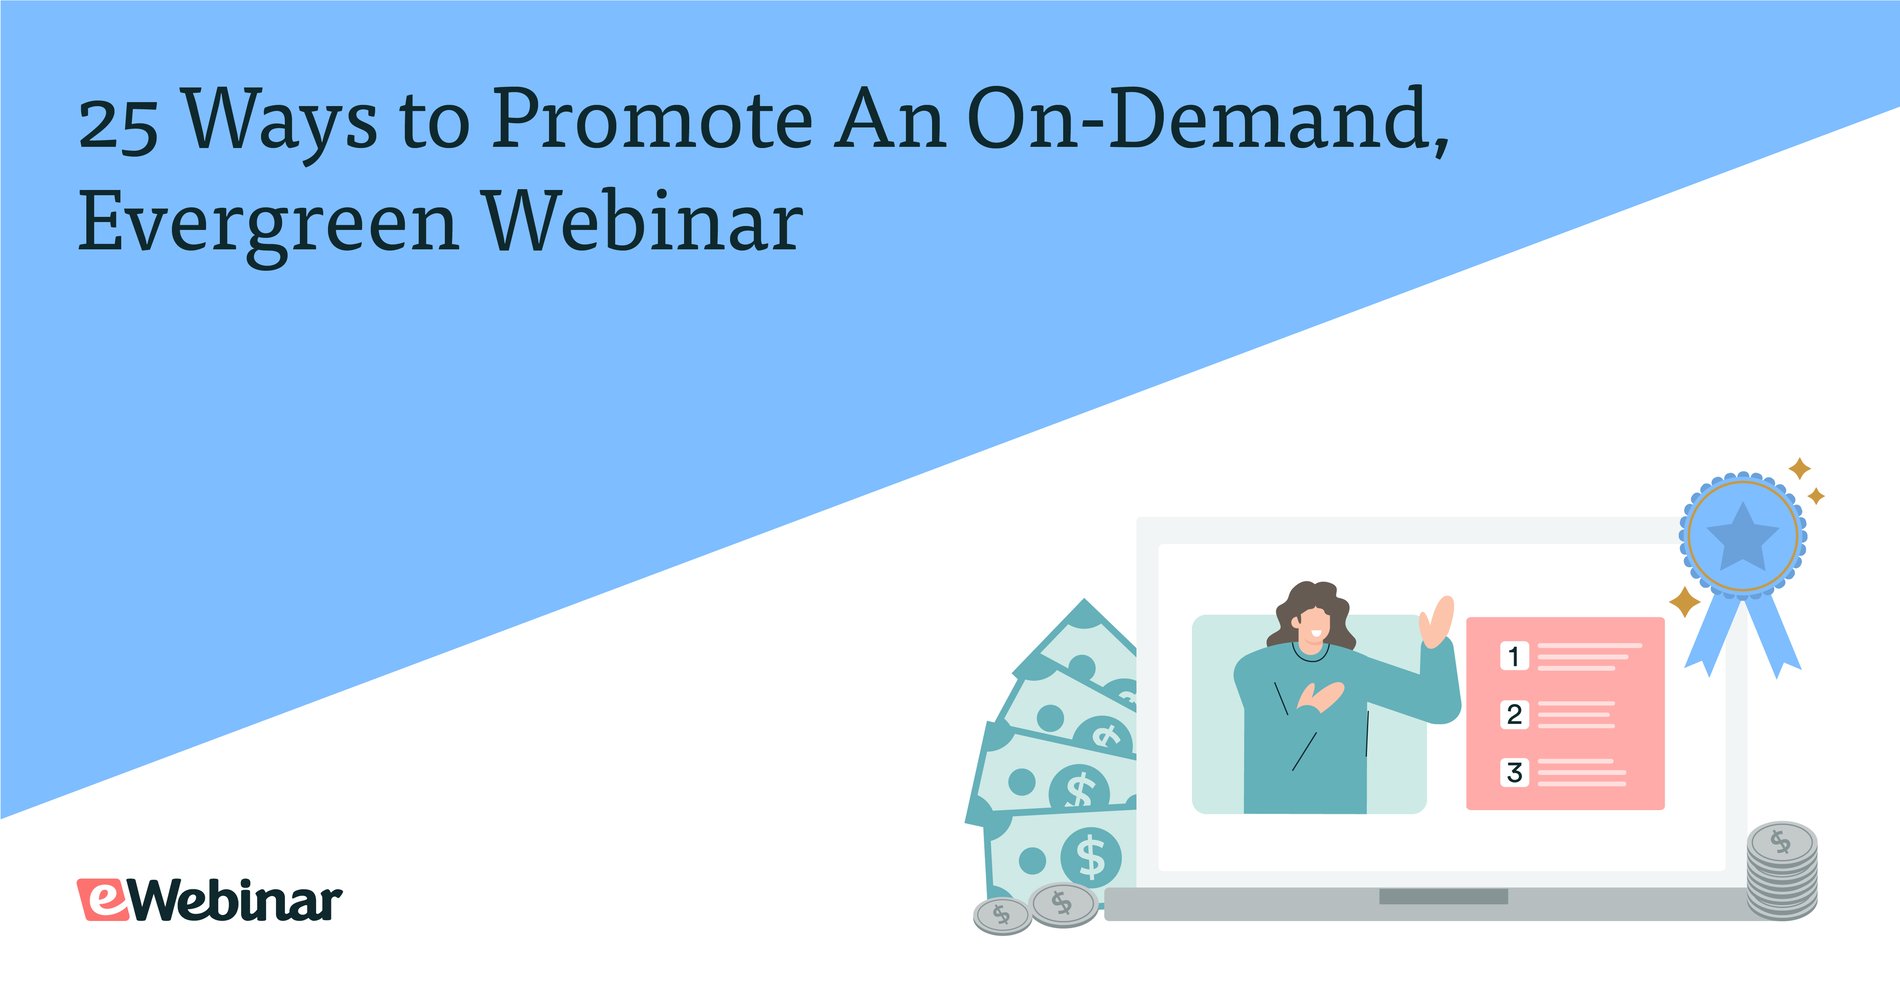 25 Ways to Promote An On-Demand, Evergreen Webinar